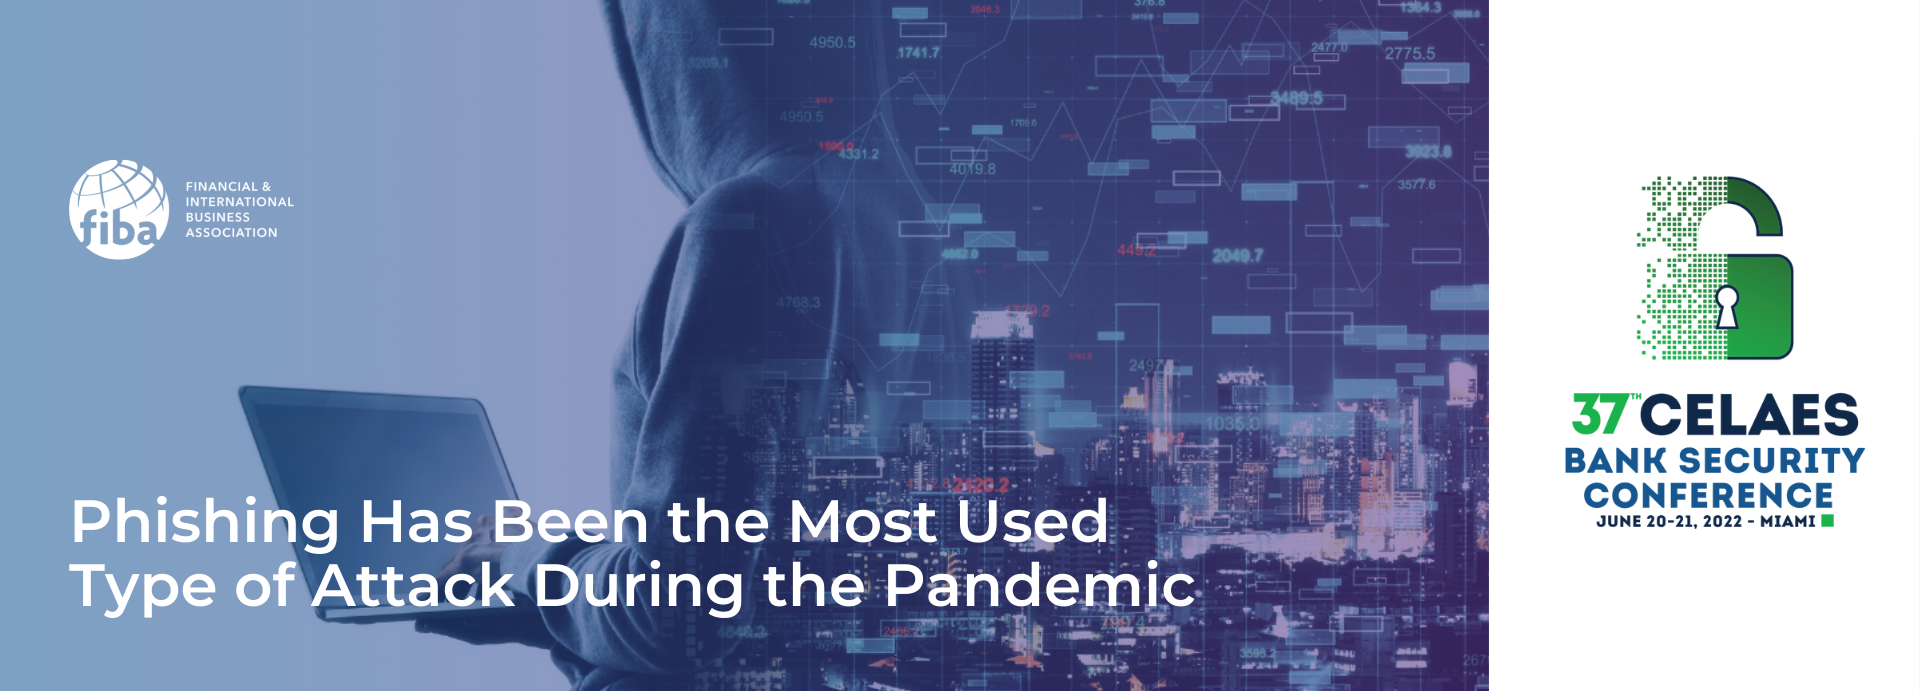 Phishing Has Been the Most Used Type of Attack During the Pandemic